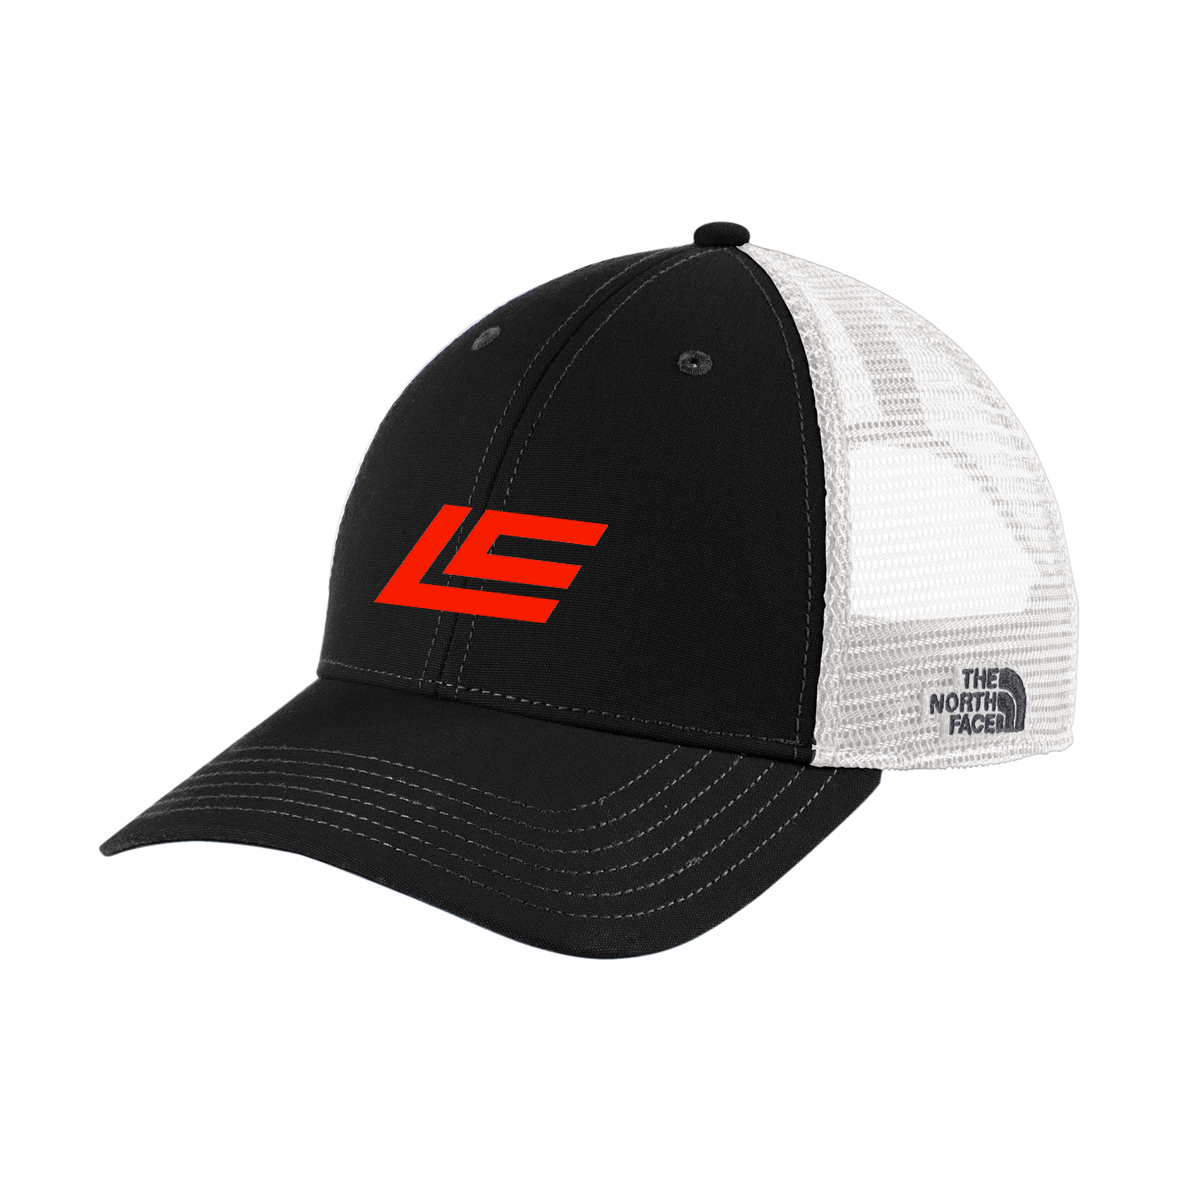 Life Church The North Face Trucker Hat